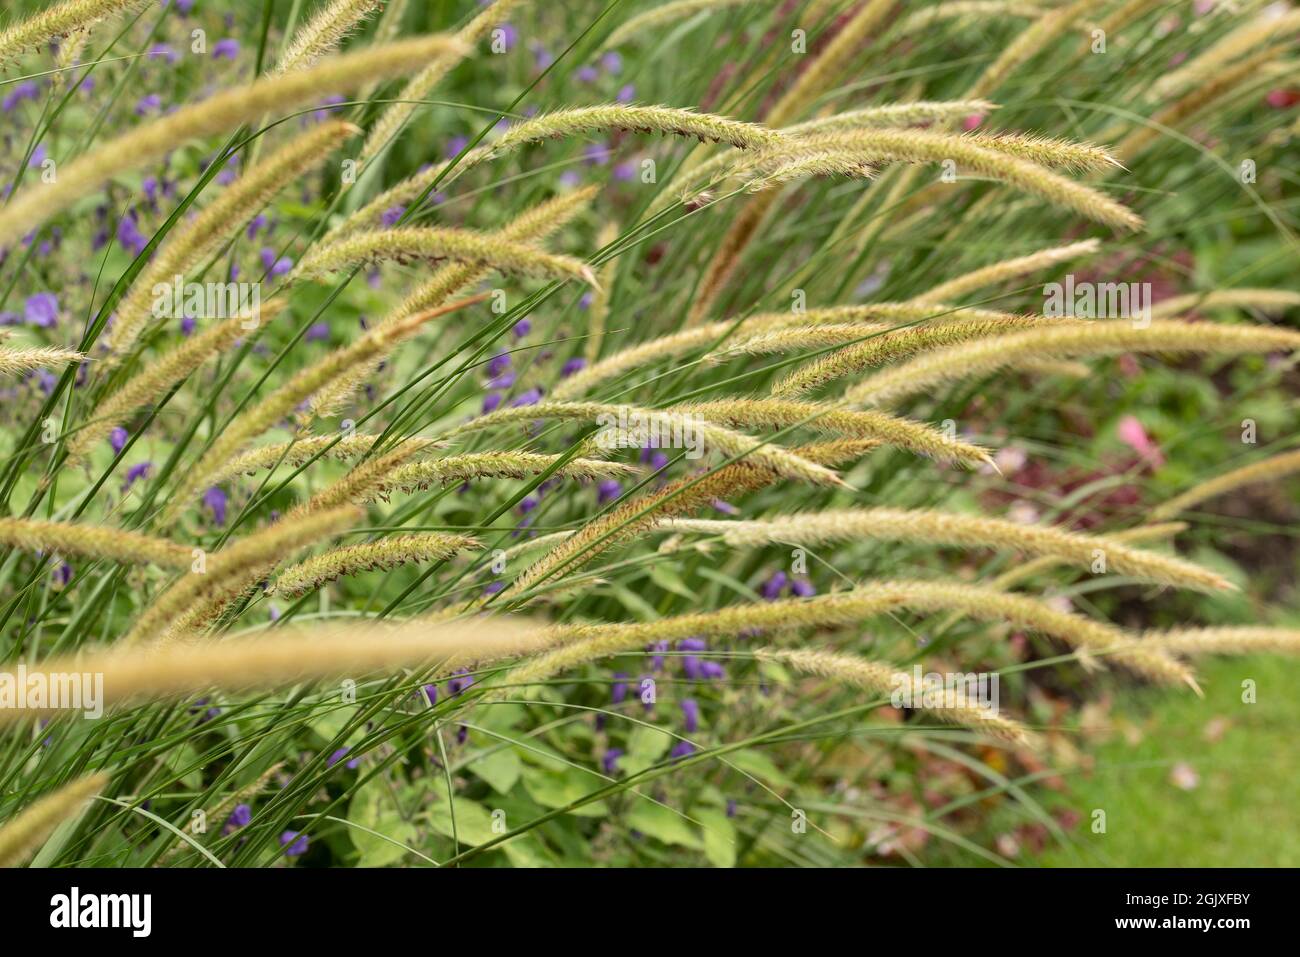 Stunning close up image of ornamental grass African Feather grass Pennisetum Macrorum in English country garden landscape using selective focus Stock Photo